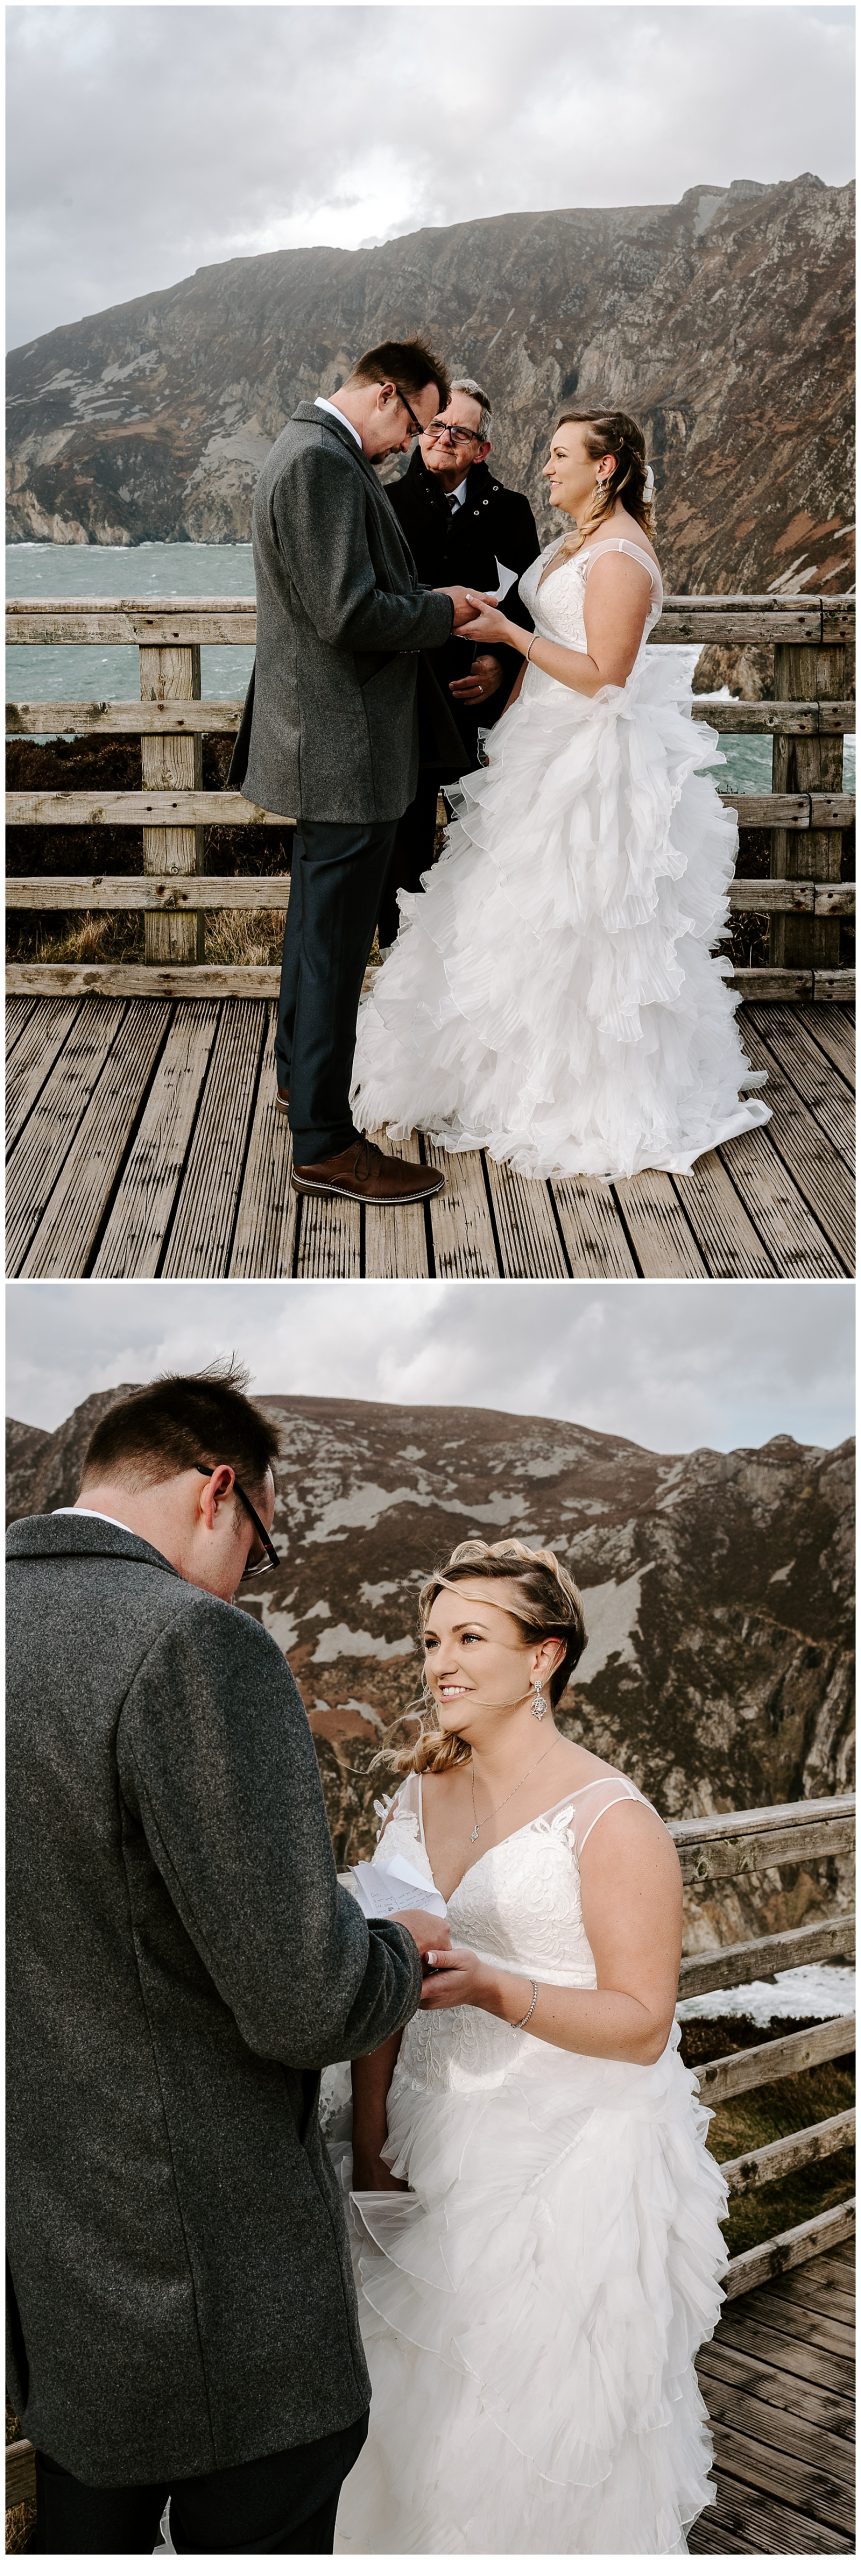 Beautiful couple eloping in Ireland as they say their vows.